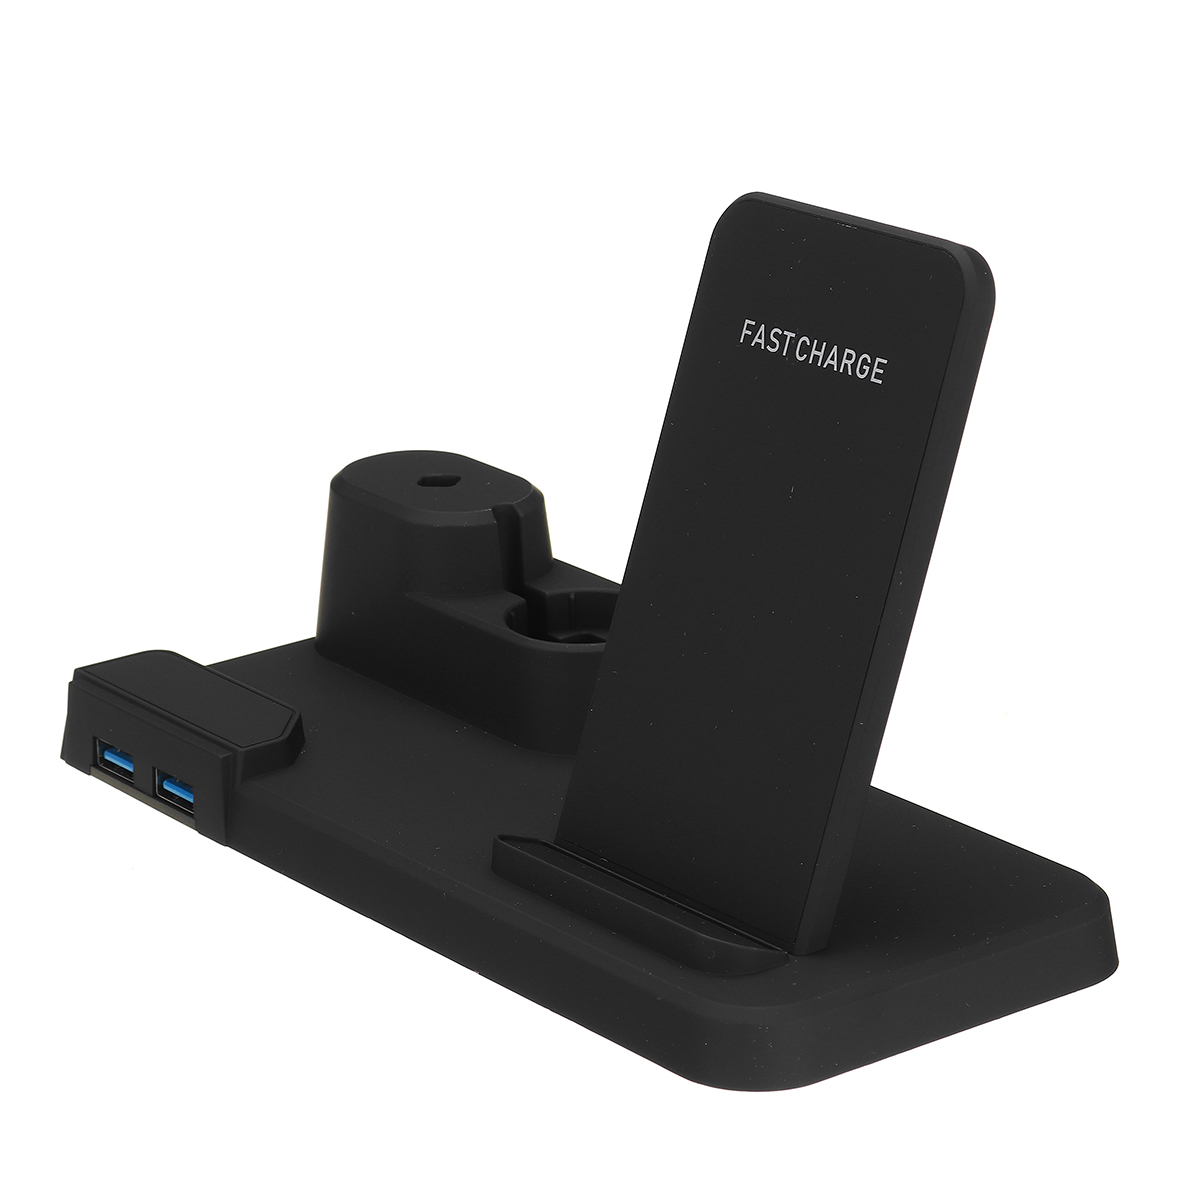 3-IN-1-Qi-Wireless-Charger-Charging-Stand-Dock-Mobile-Phone-Holder-Stand-for-iPhone-Airpods-iWatch-1790259-10